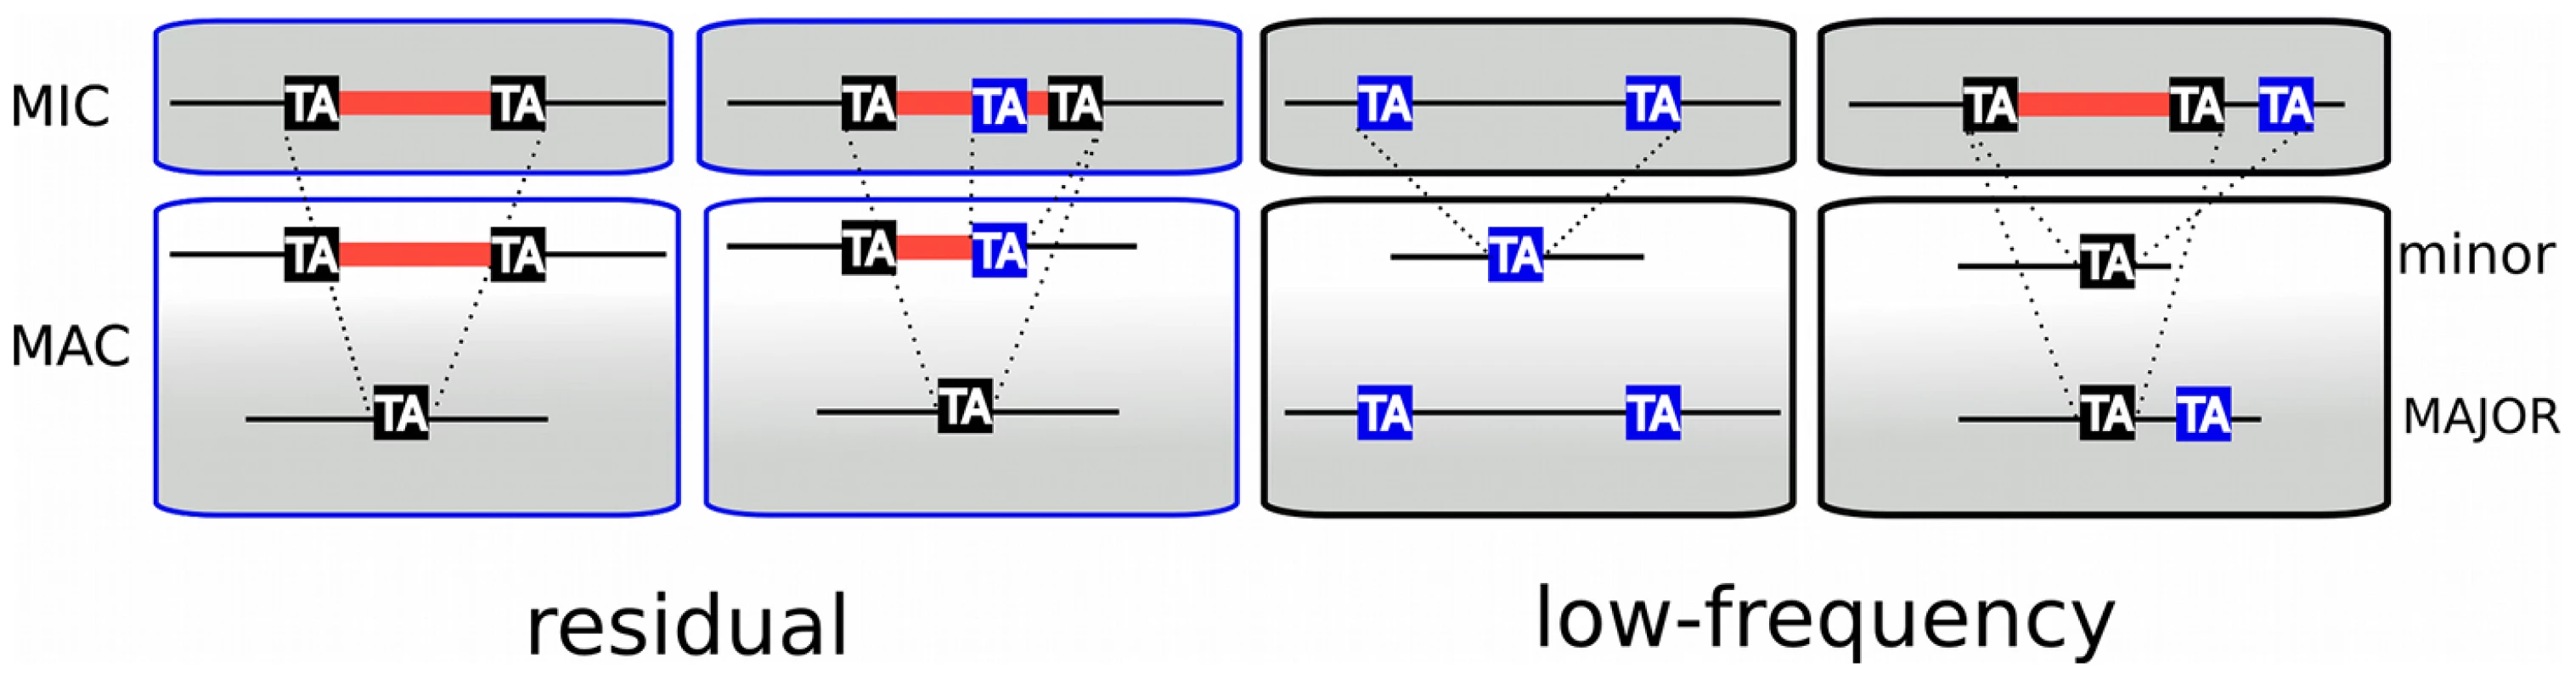 TA-indels are produced by IES excision errors.